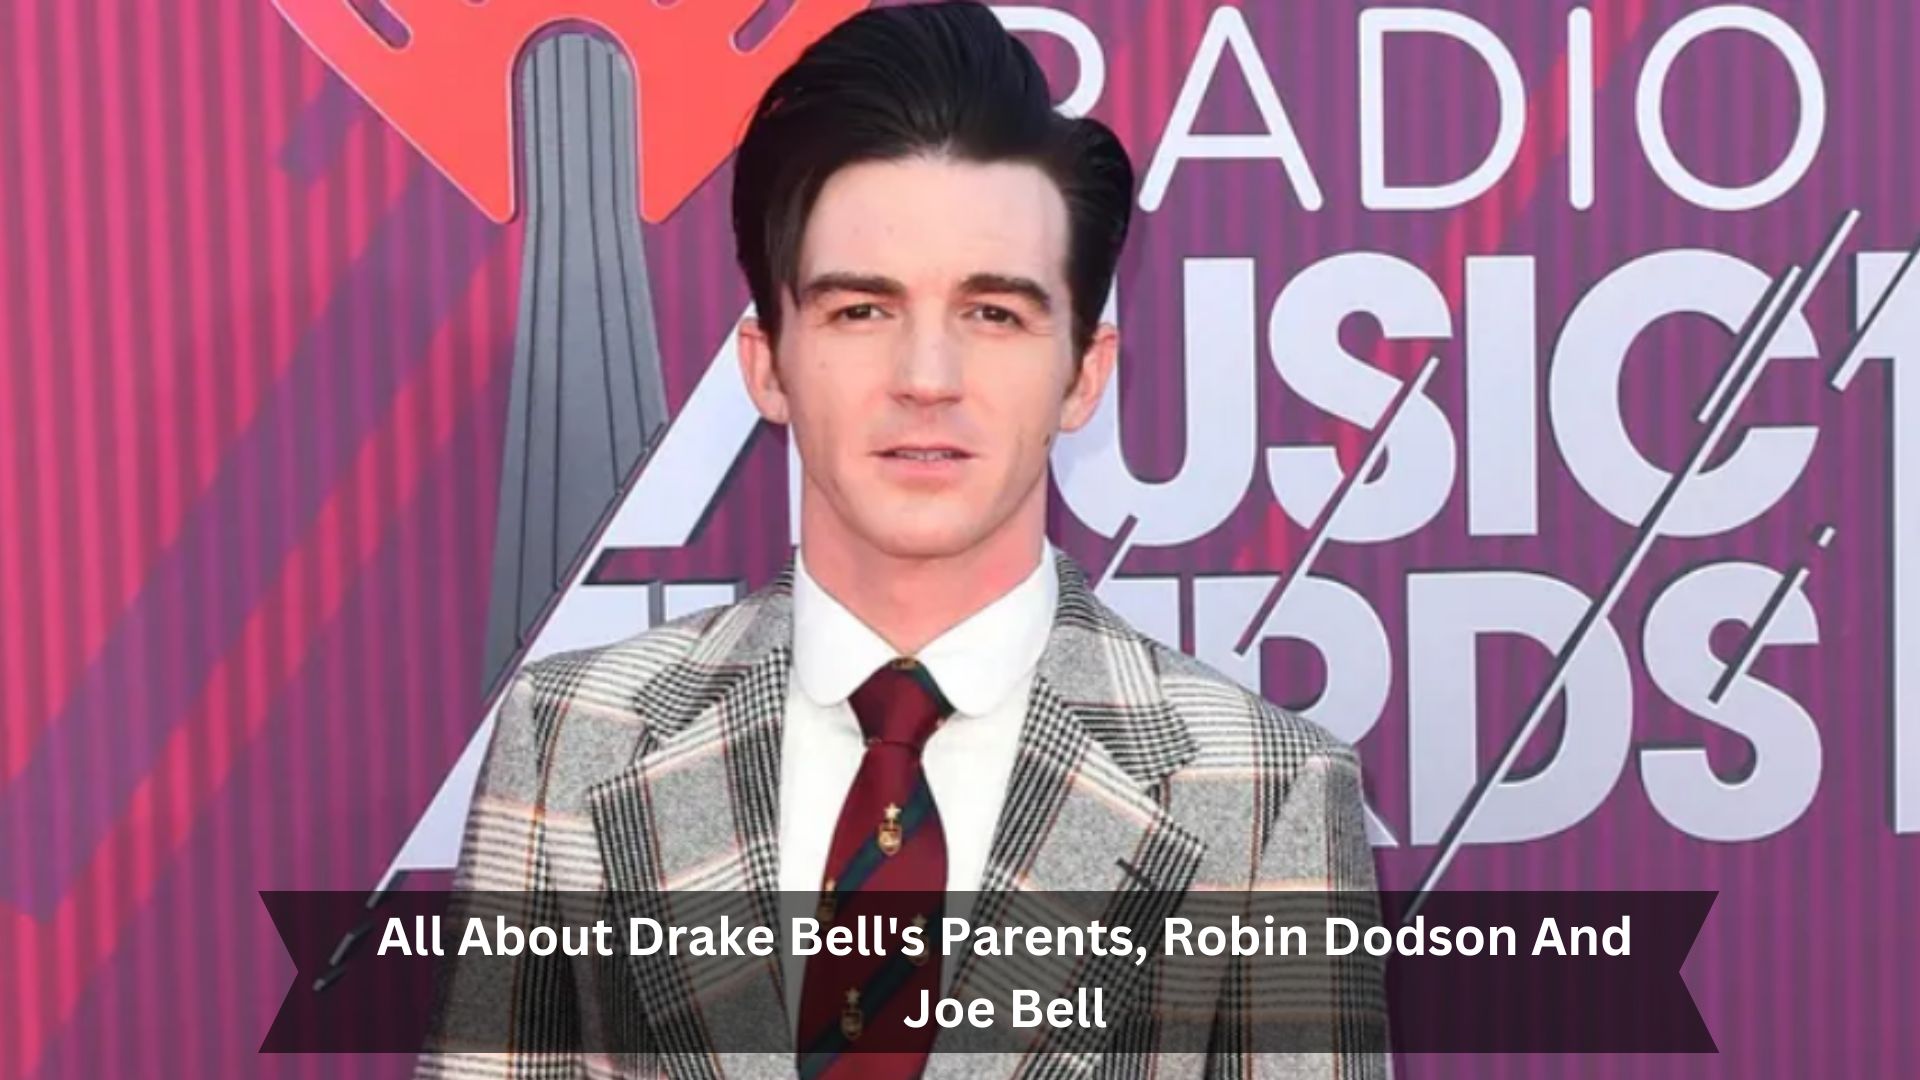 All About Drake Bell's Parents, Robin Dodson And Joe Bell